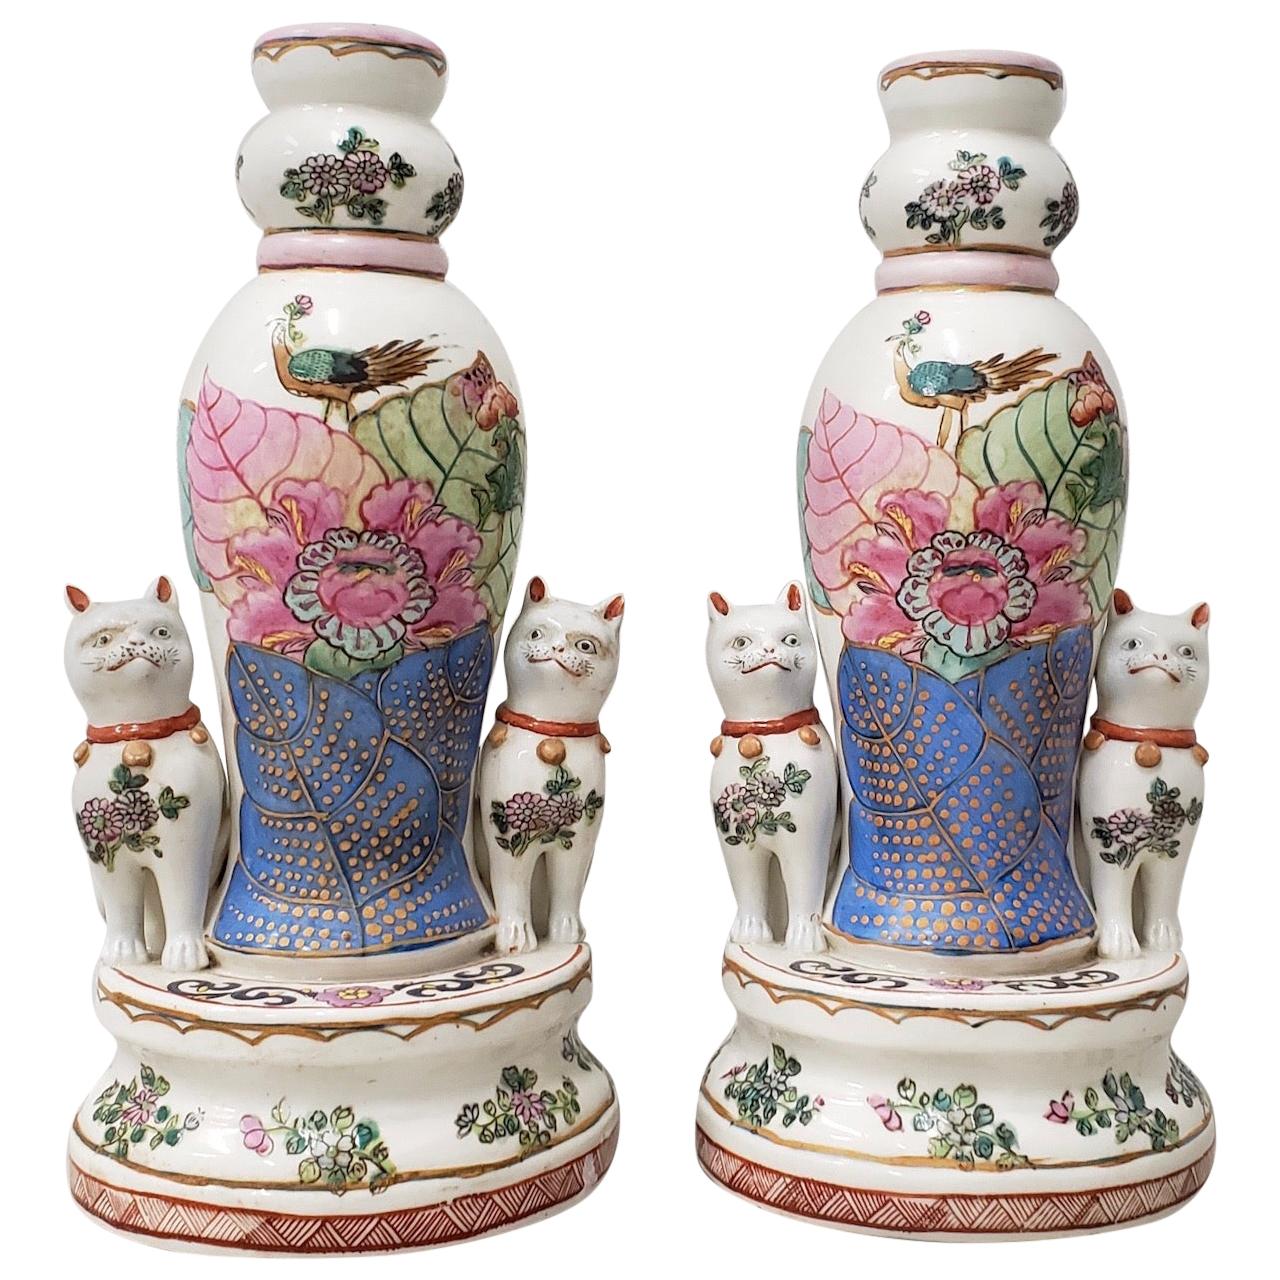 Pair of Early to Mid-20th Century Chinese Porcelain Figurines with Cats